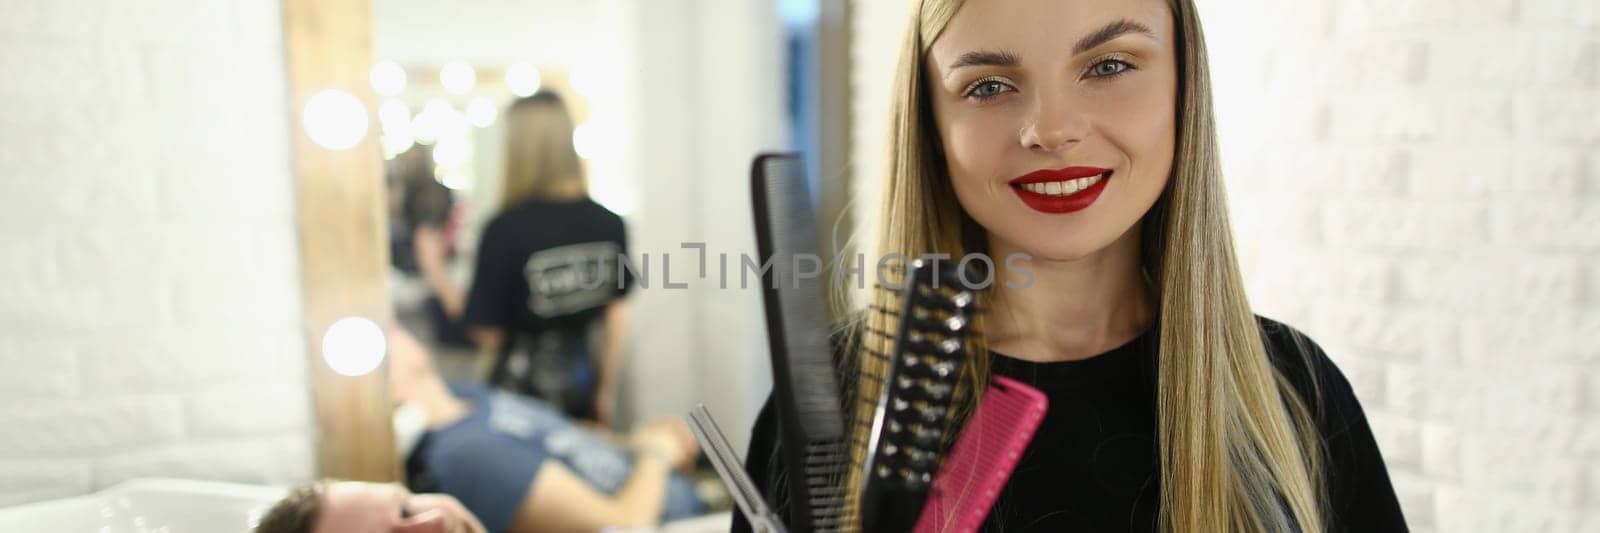 Smiling female hairdresser holding combs and scissors in barbershop. Beauty salon services